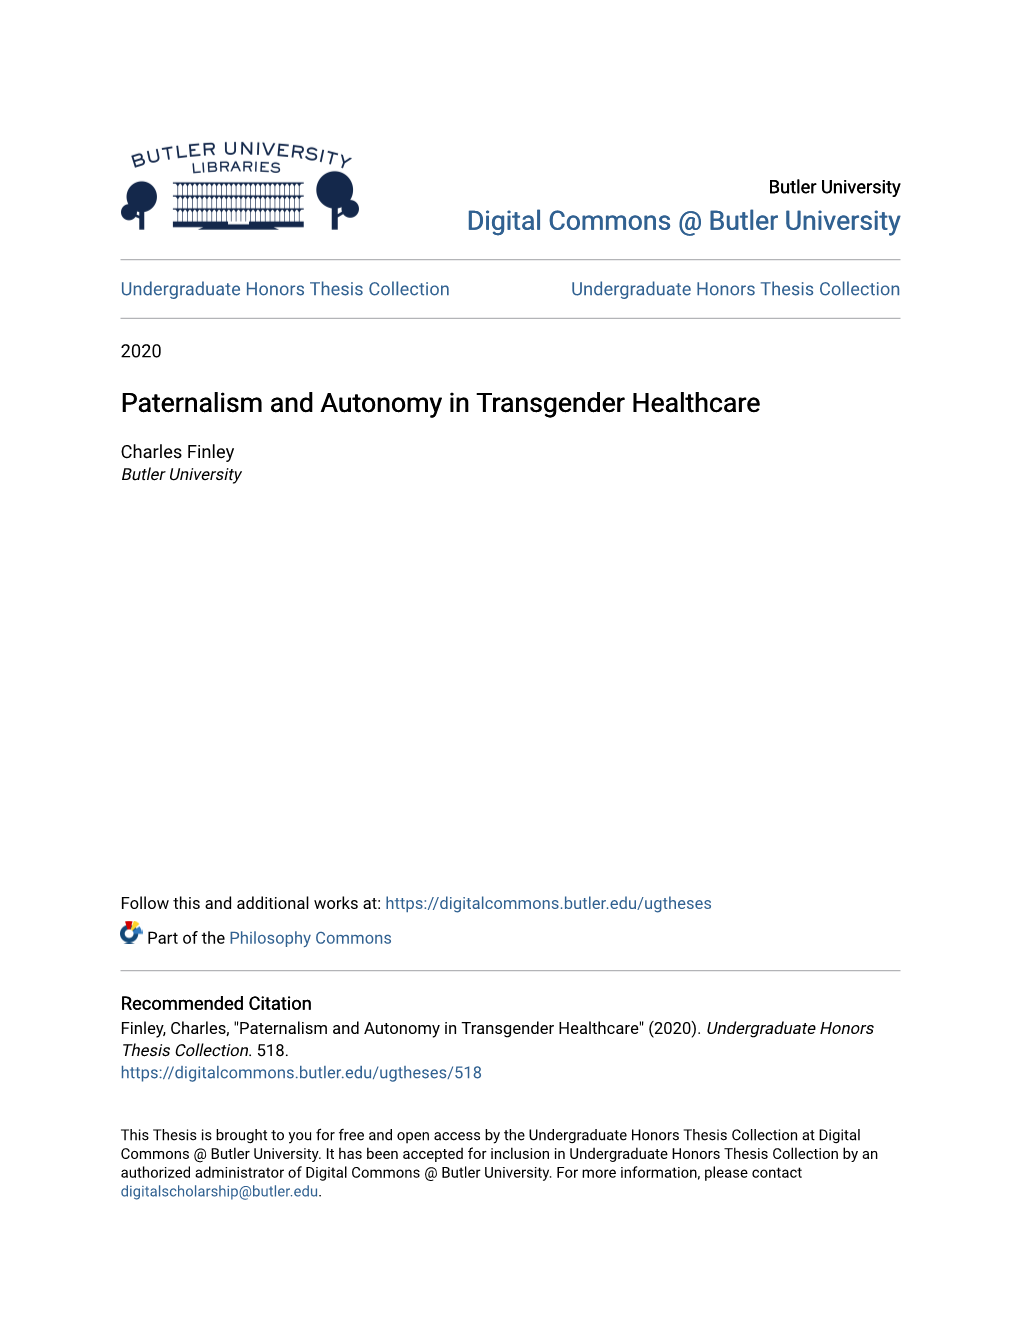 Paternalism and Autonomy in Transgender Healthcare